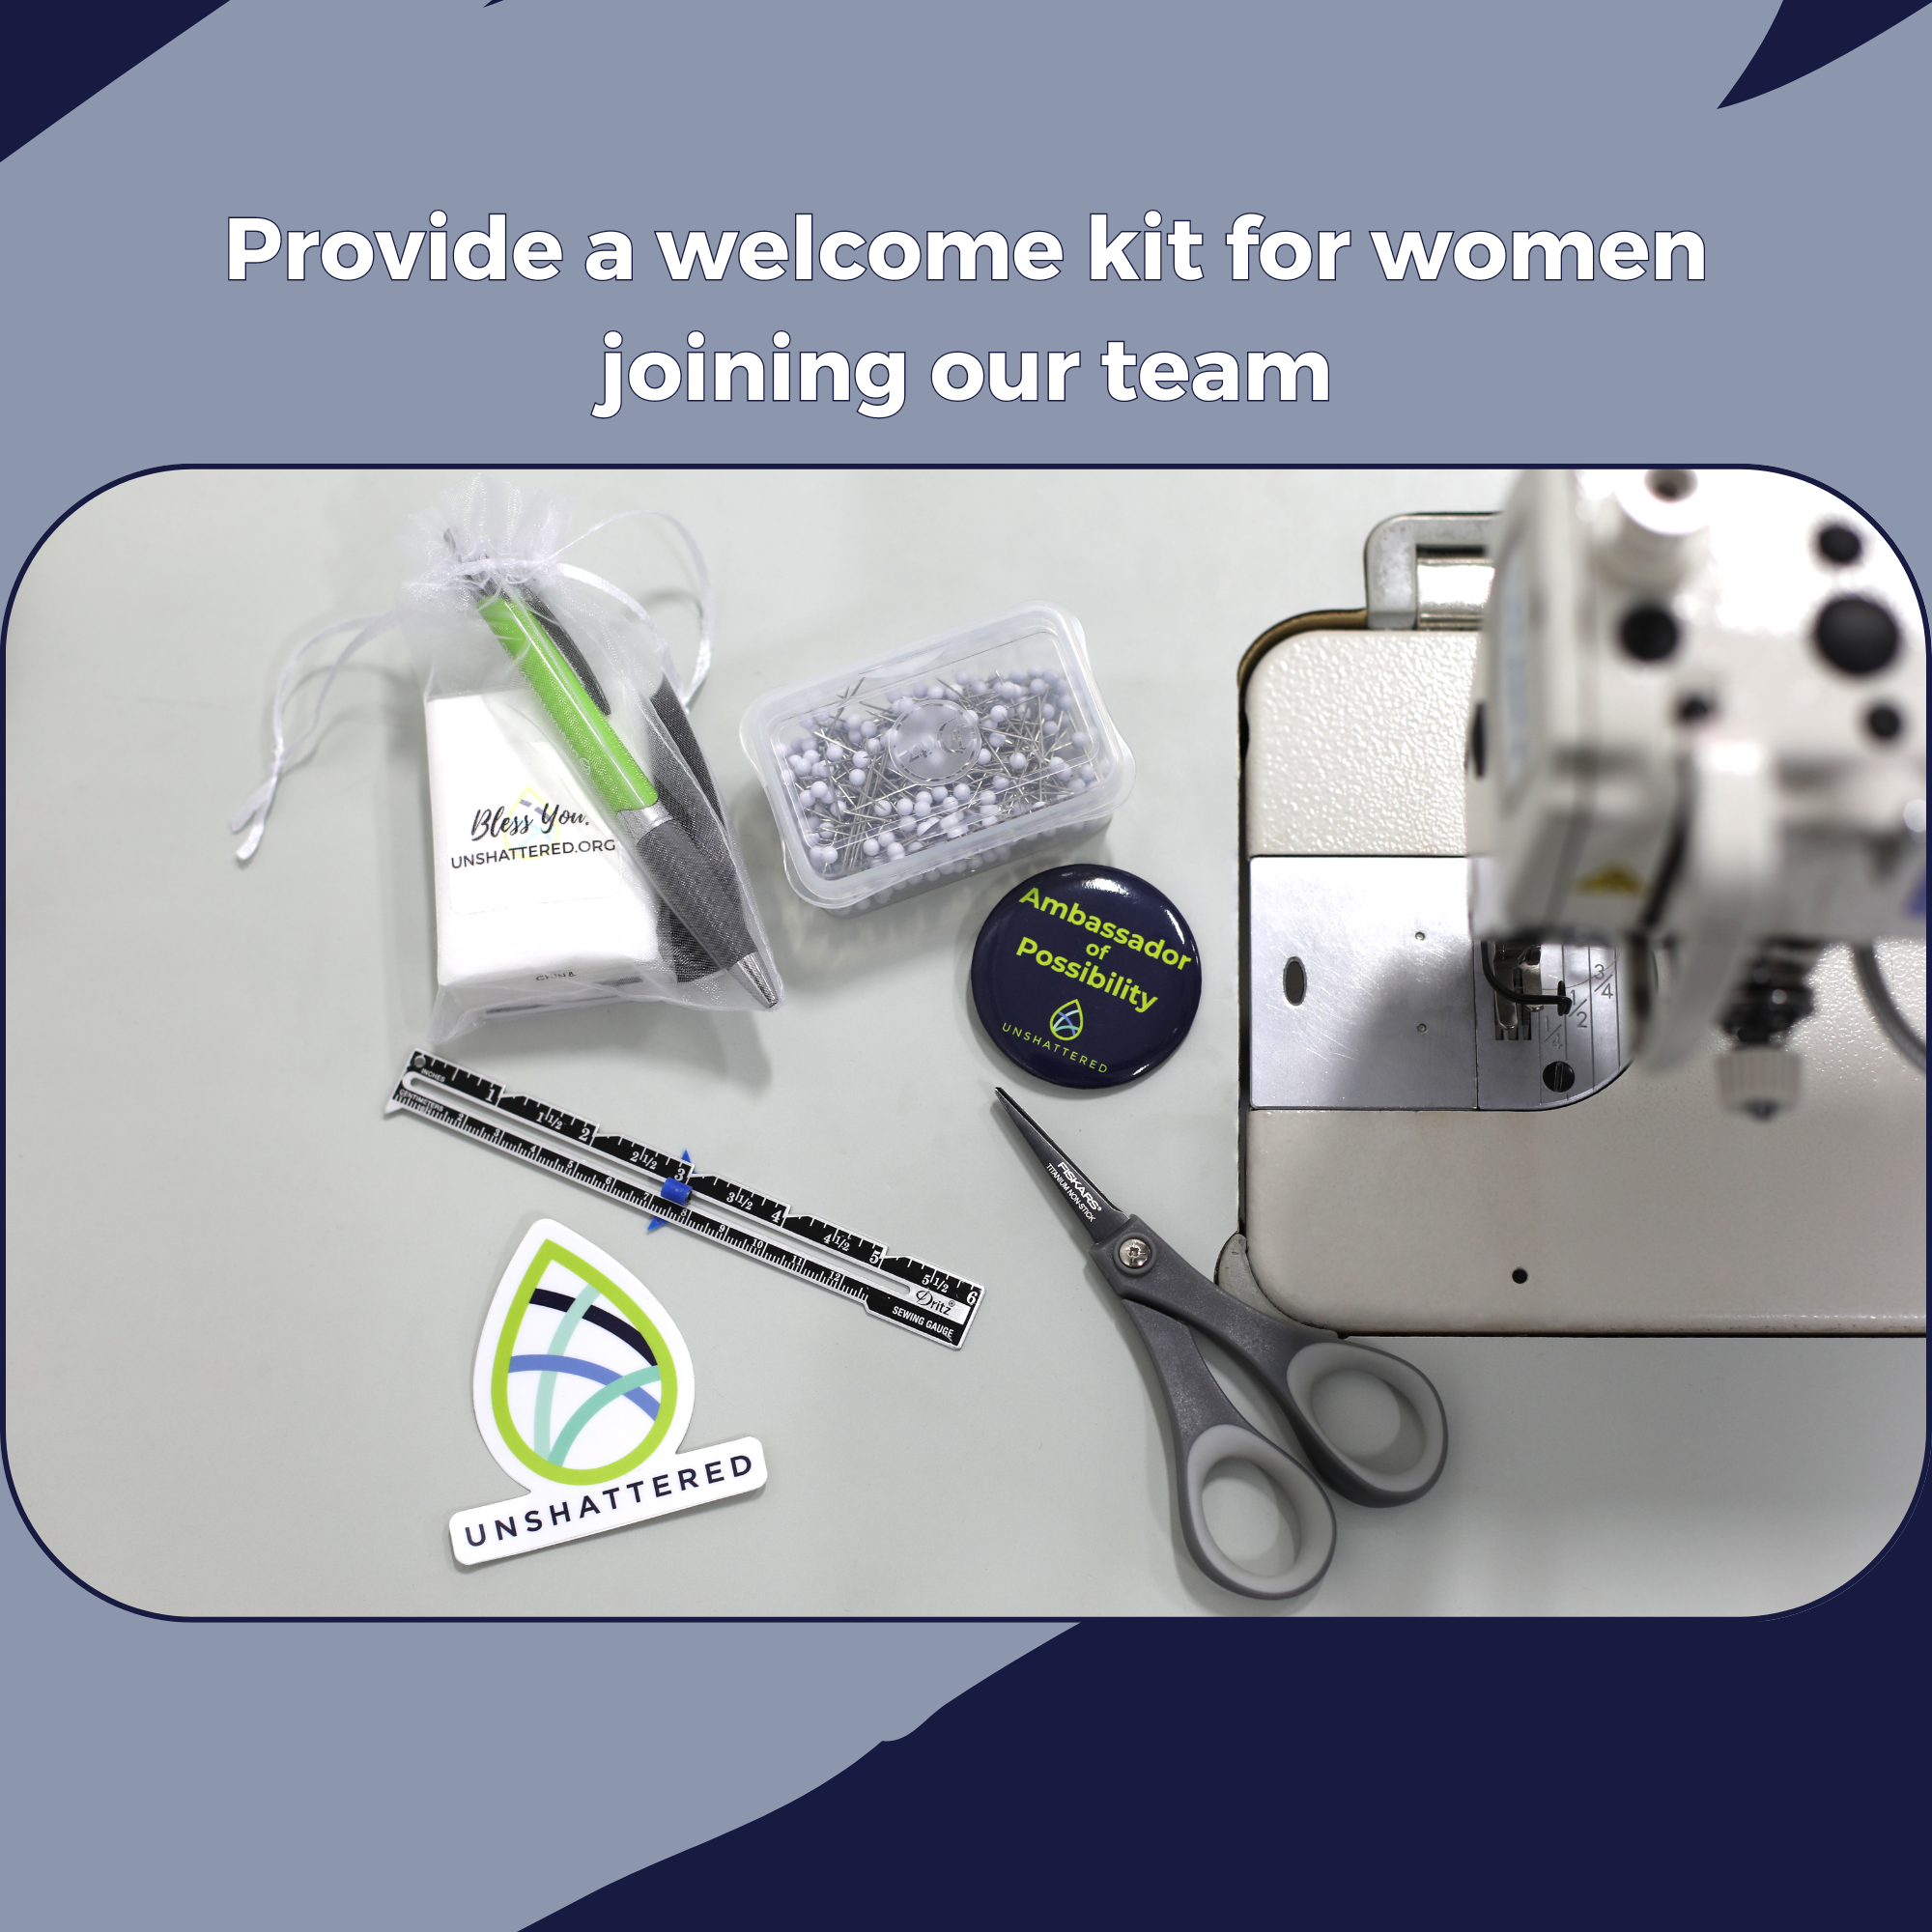 Provide a welcome kit for women joining our team